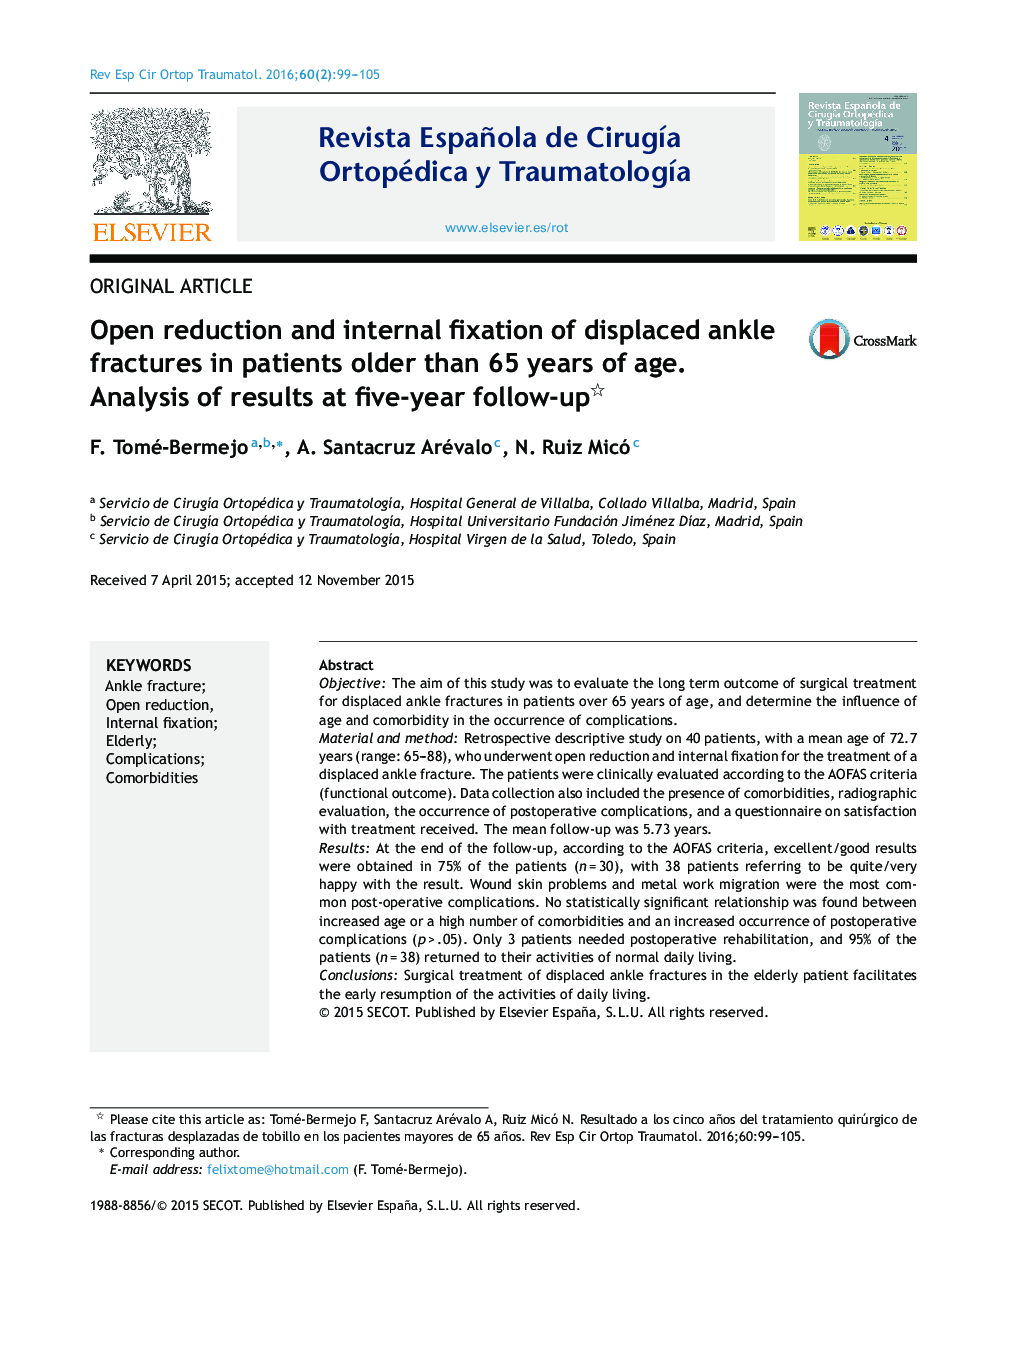 Open reduction and internal fixation of displaced ankle fractures in patients older than 65 years of age. Analysis of results at five-year follow-up